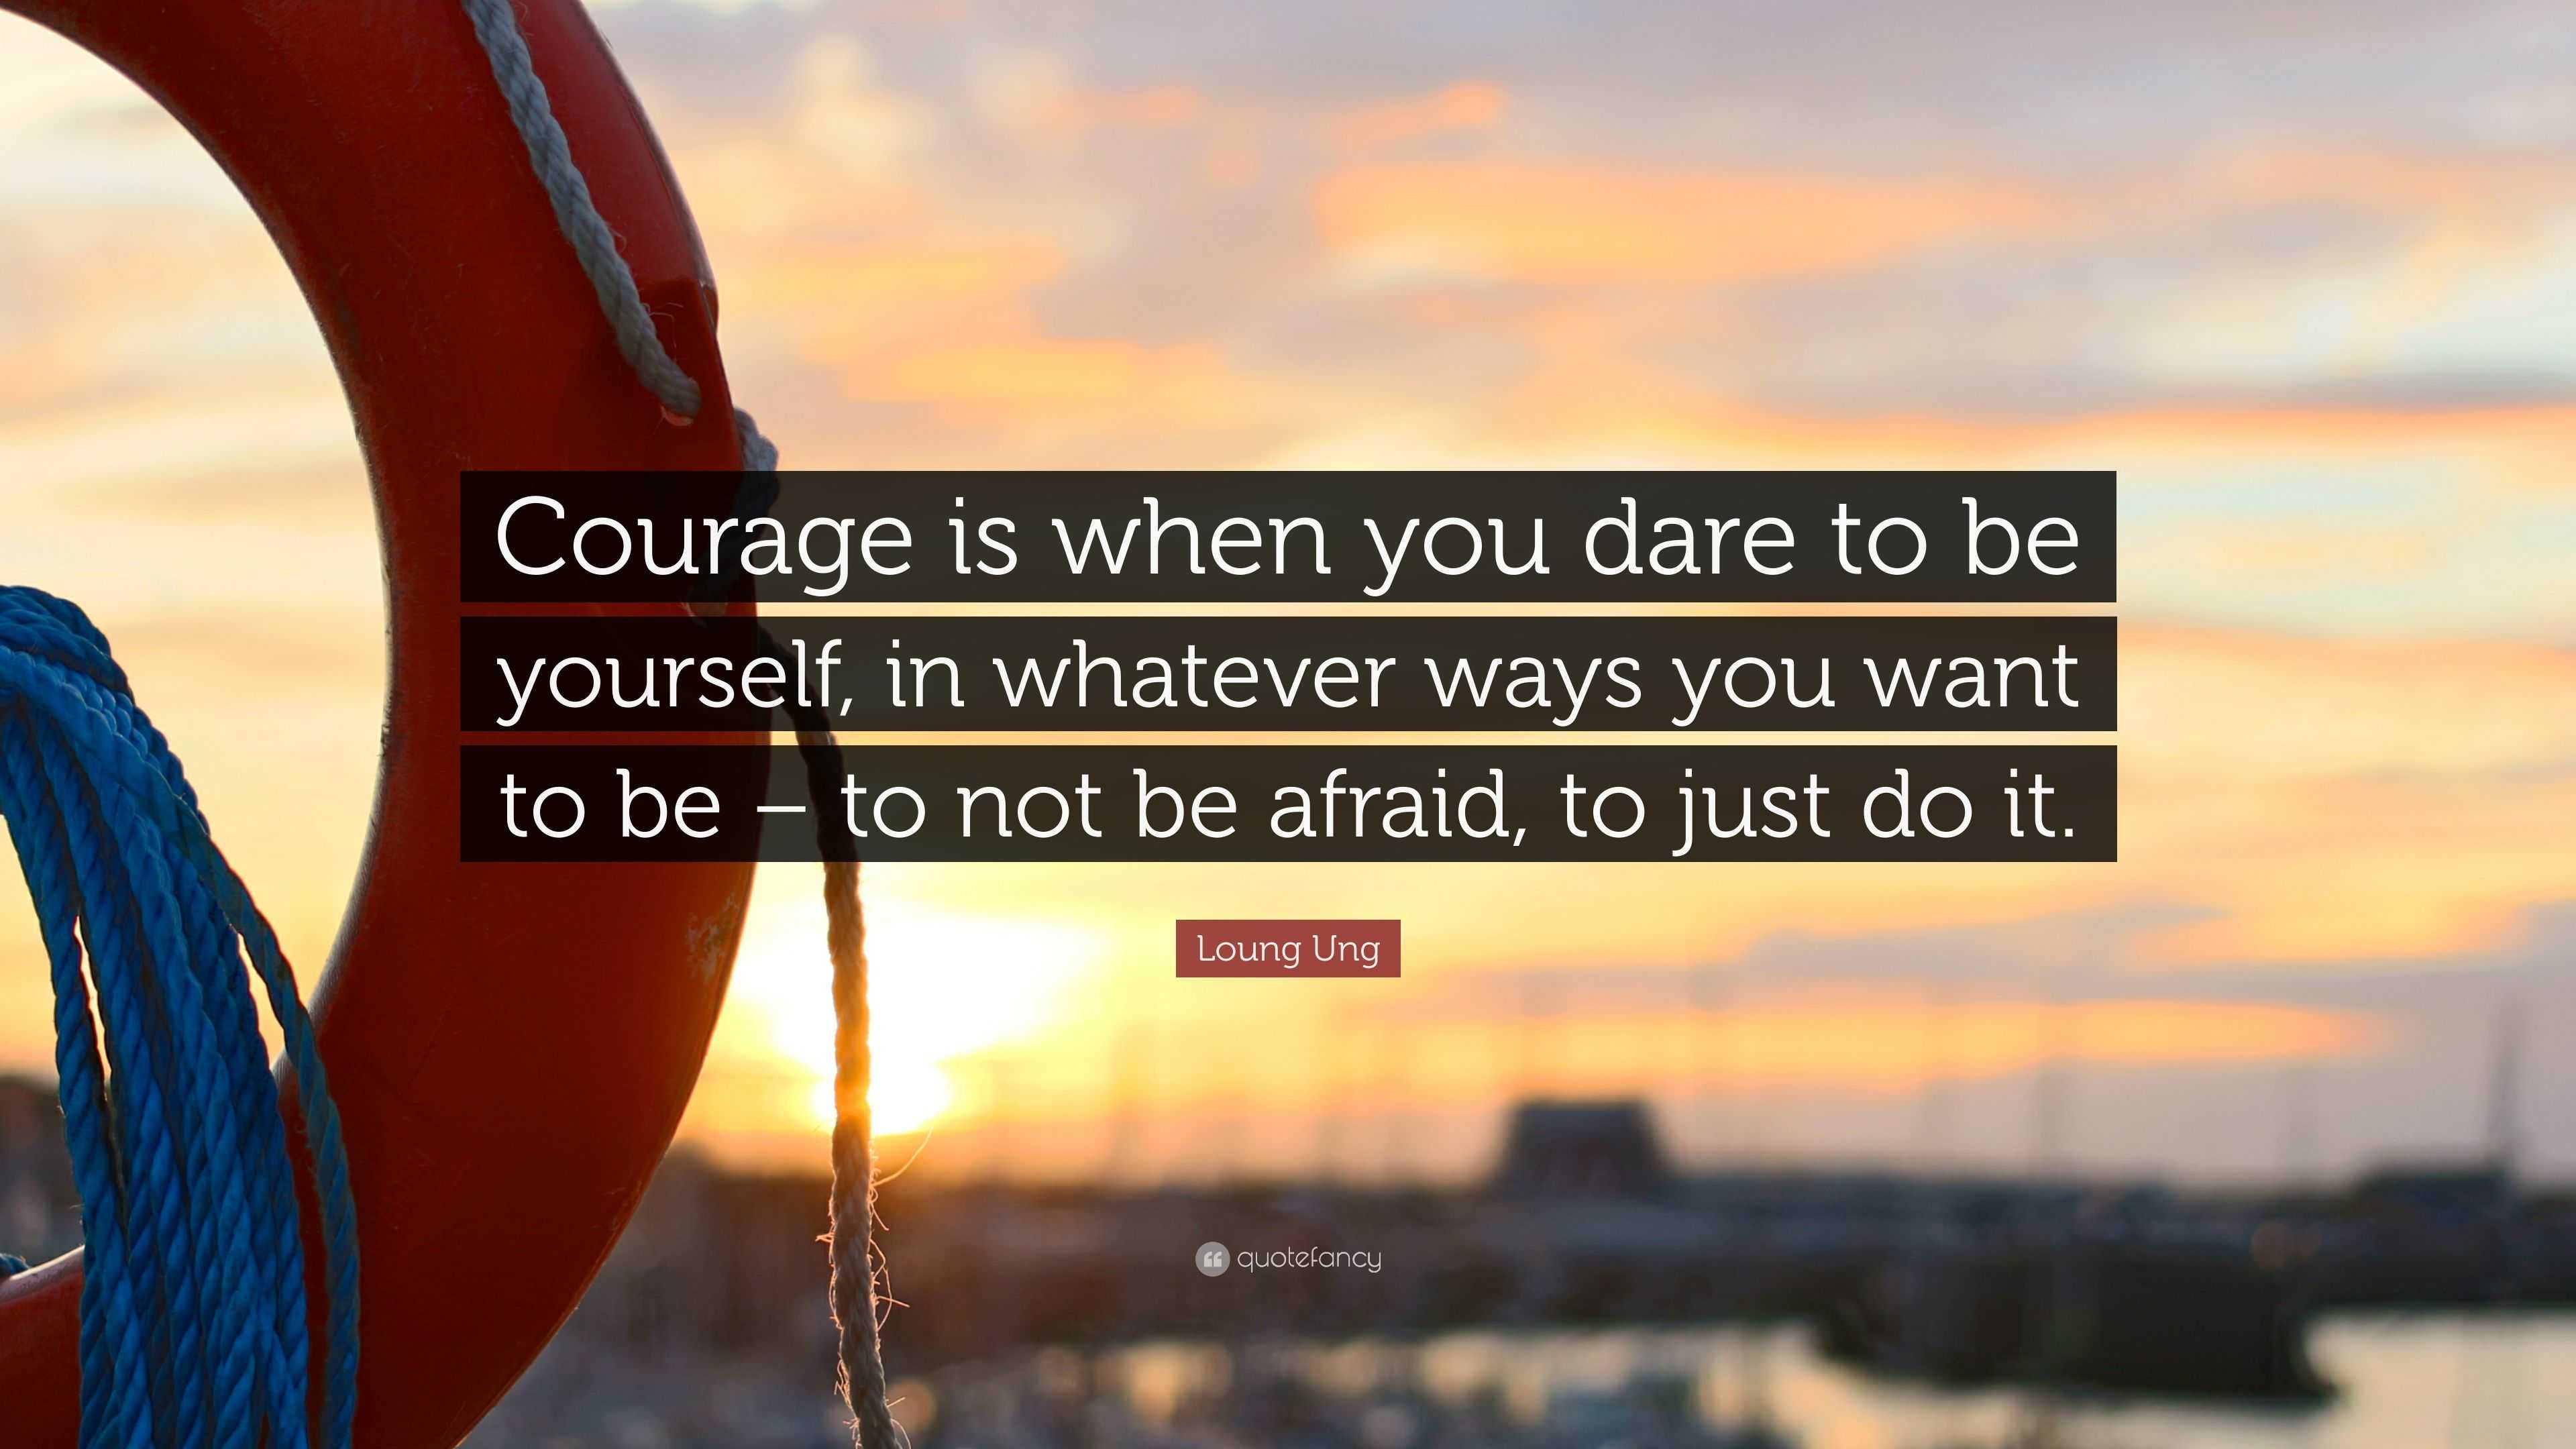 Loung Ung Quote: “Courage is when you dare to be yourself, in whatever ...